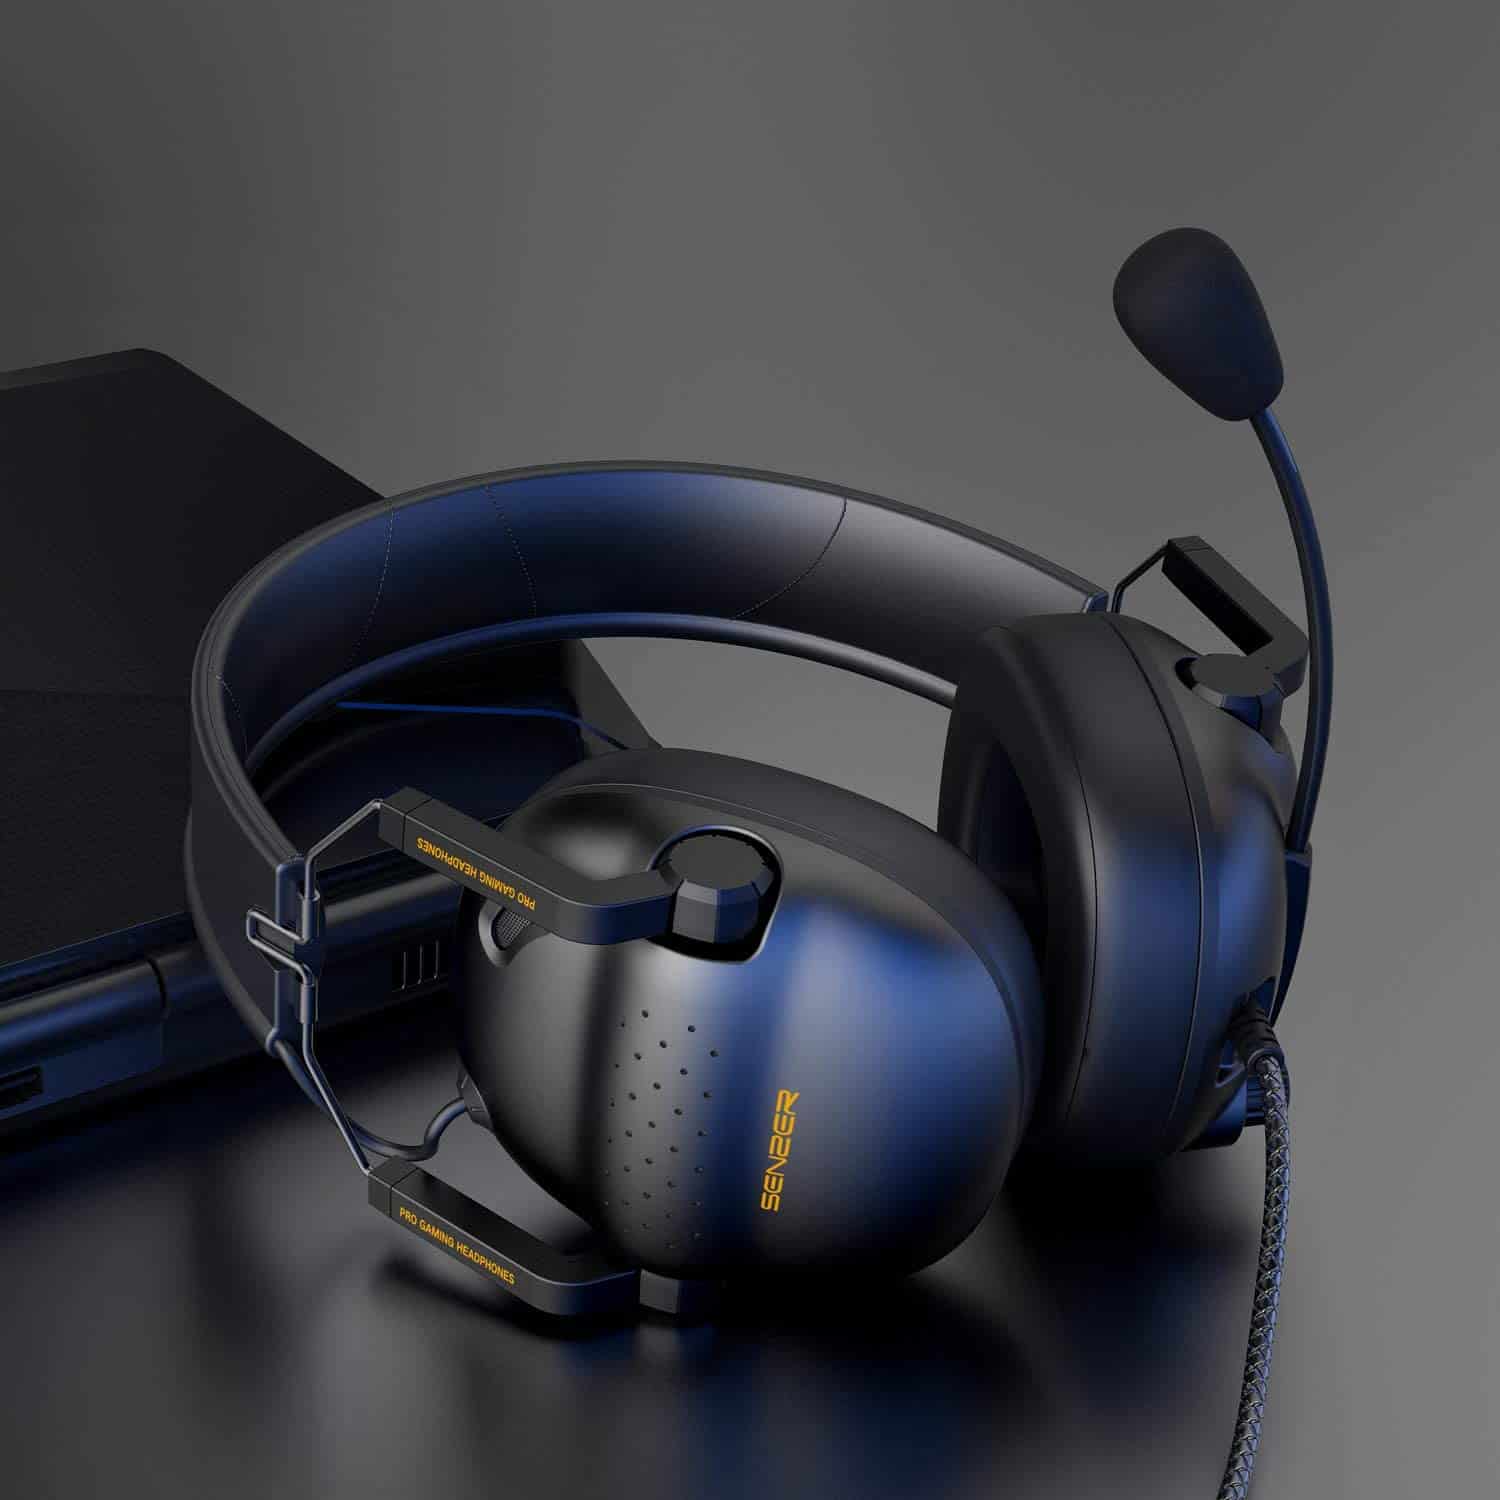 Best Sony Gaming Headsets